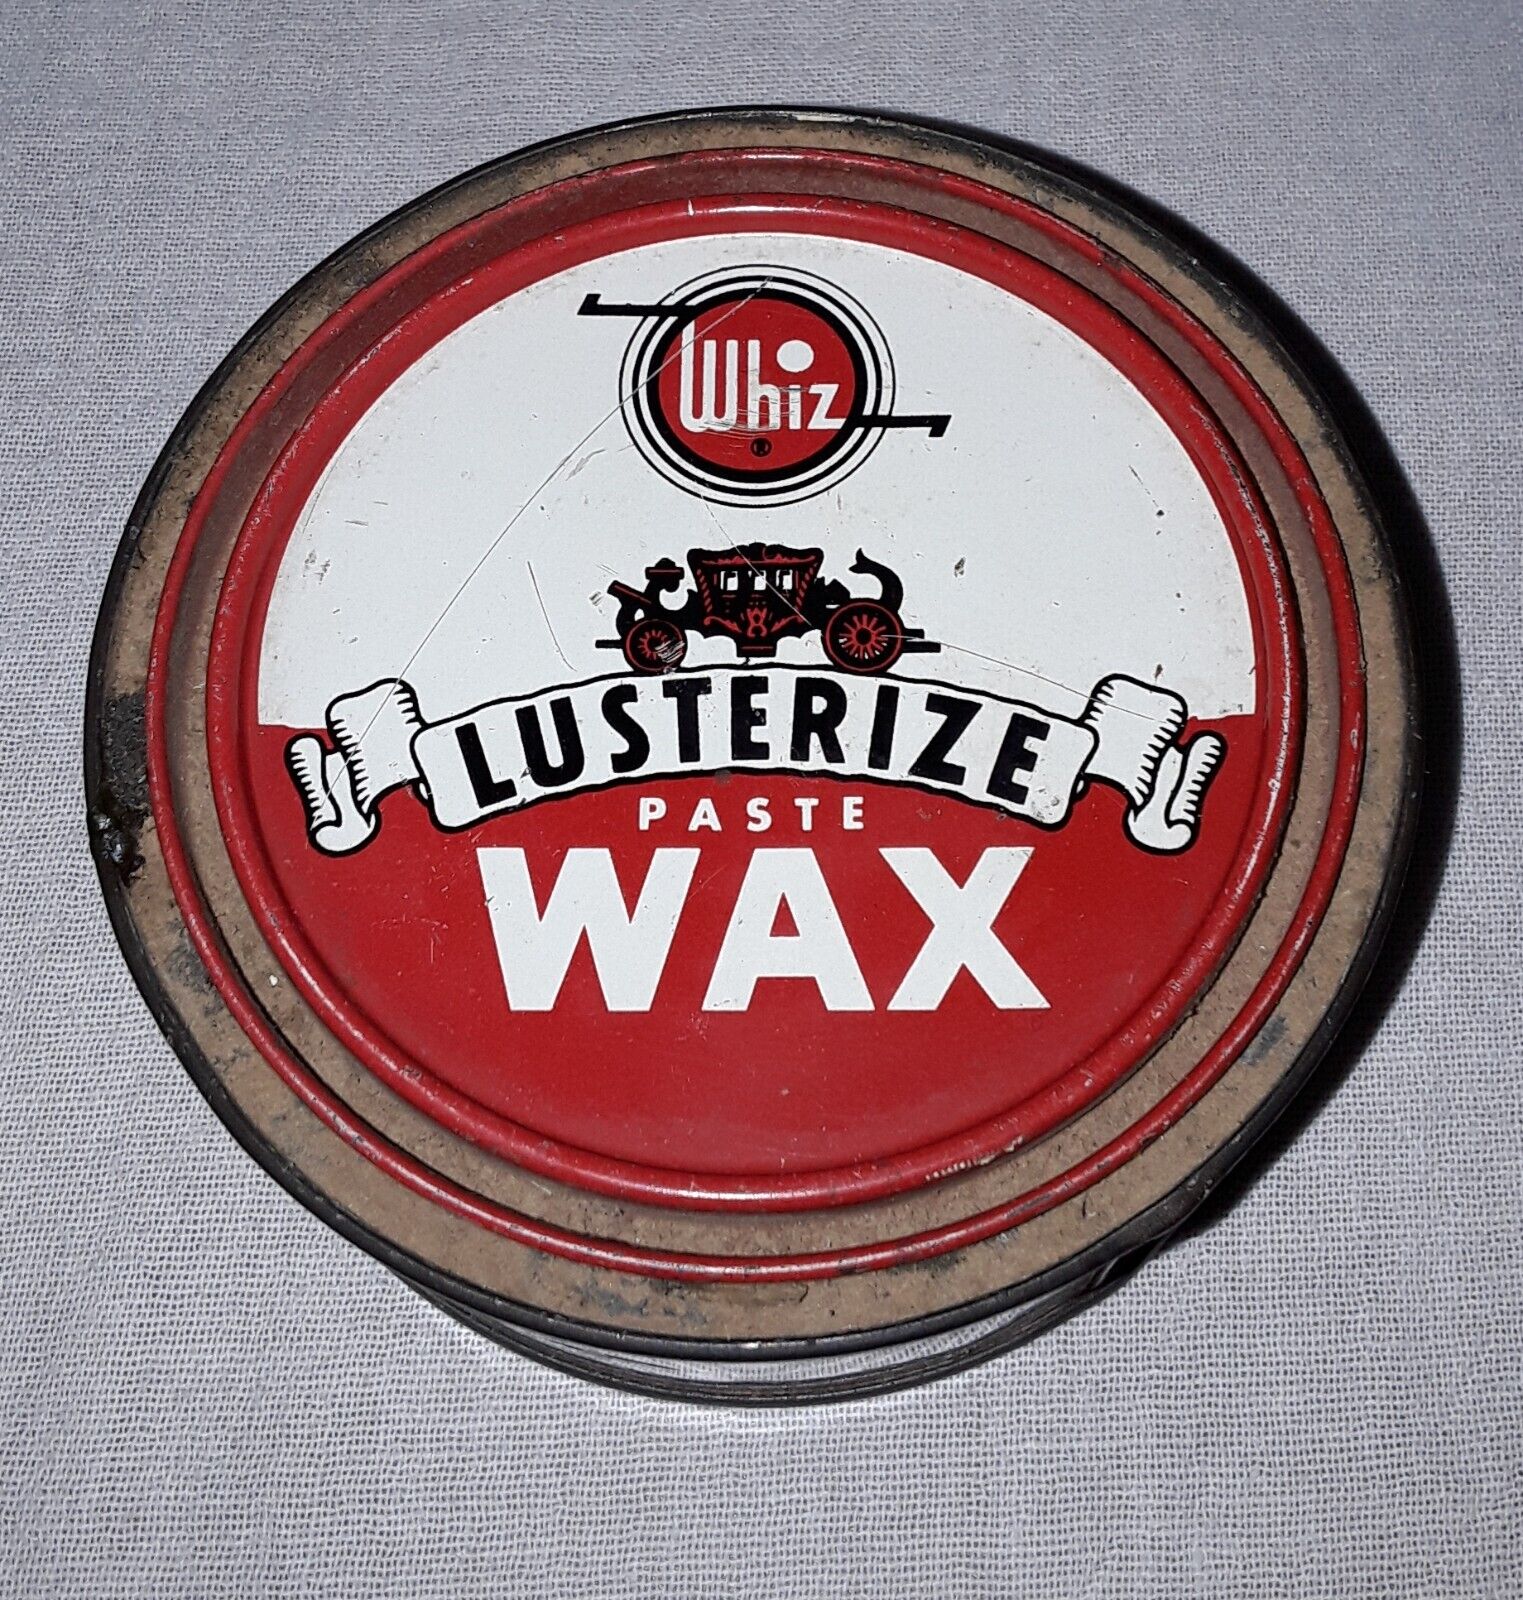 VINTAGE WHIZ LUSTERIZE PASTE WAX CAN